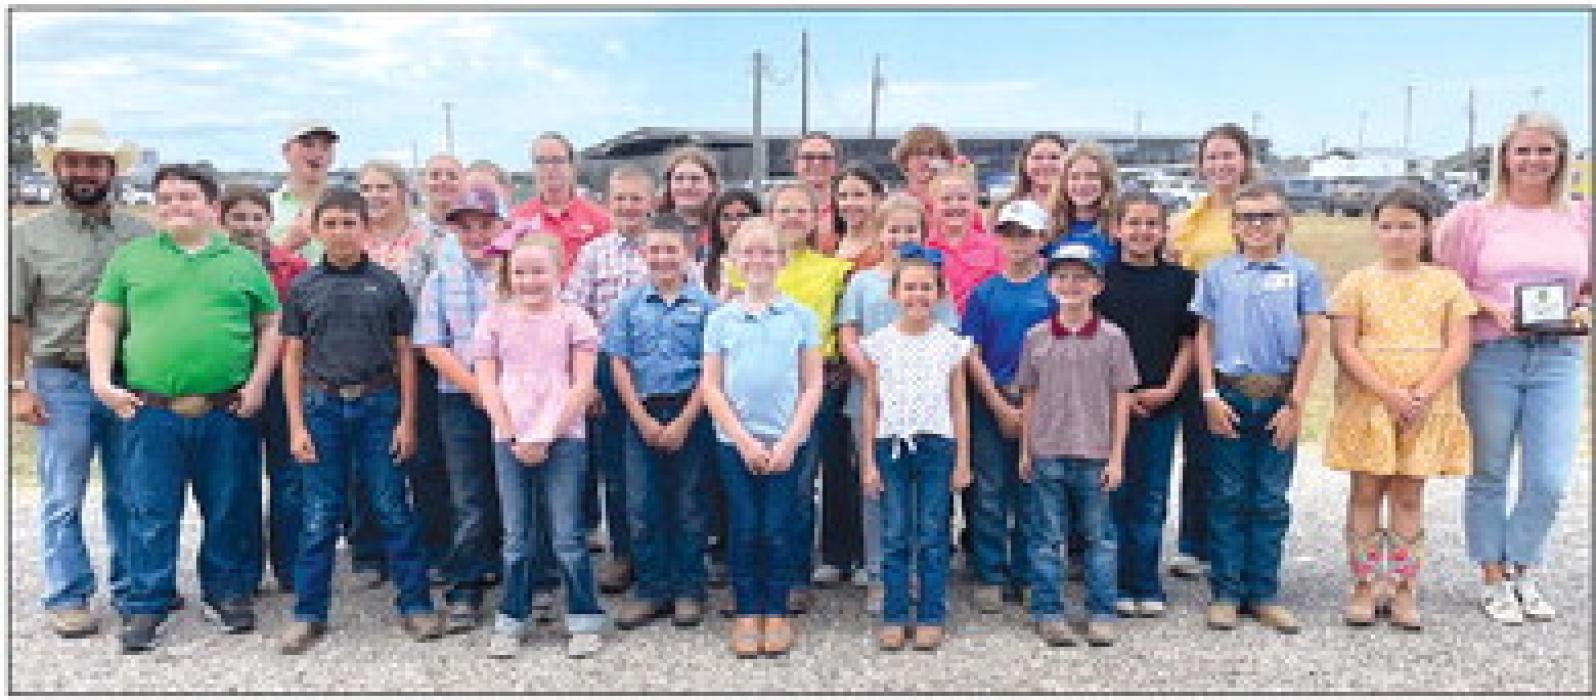 Fayette County 4-H Competes In Colorado County Livestock Judging